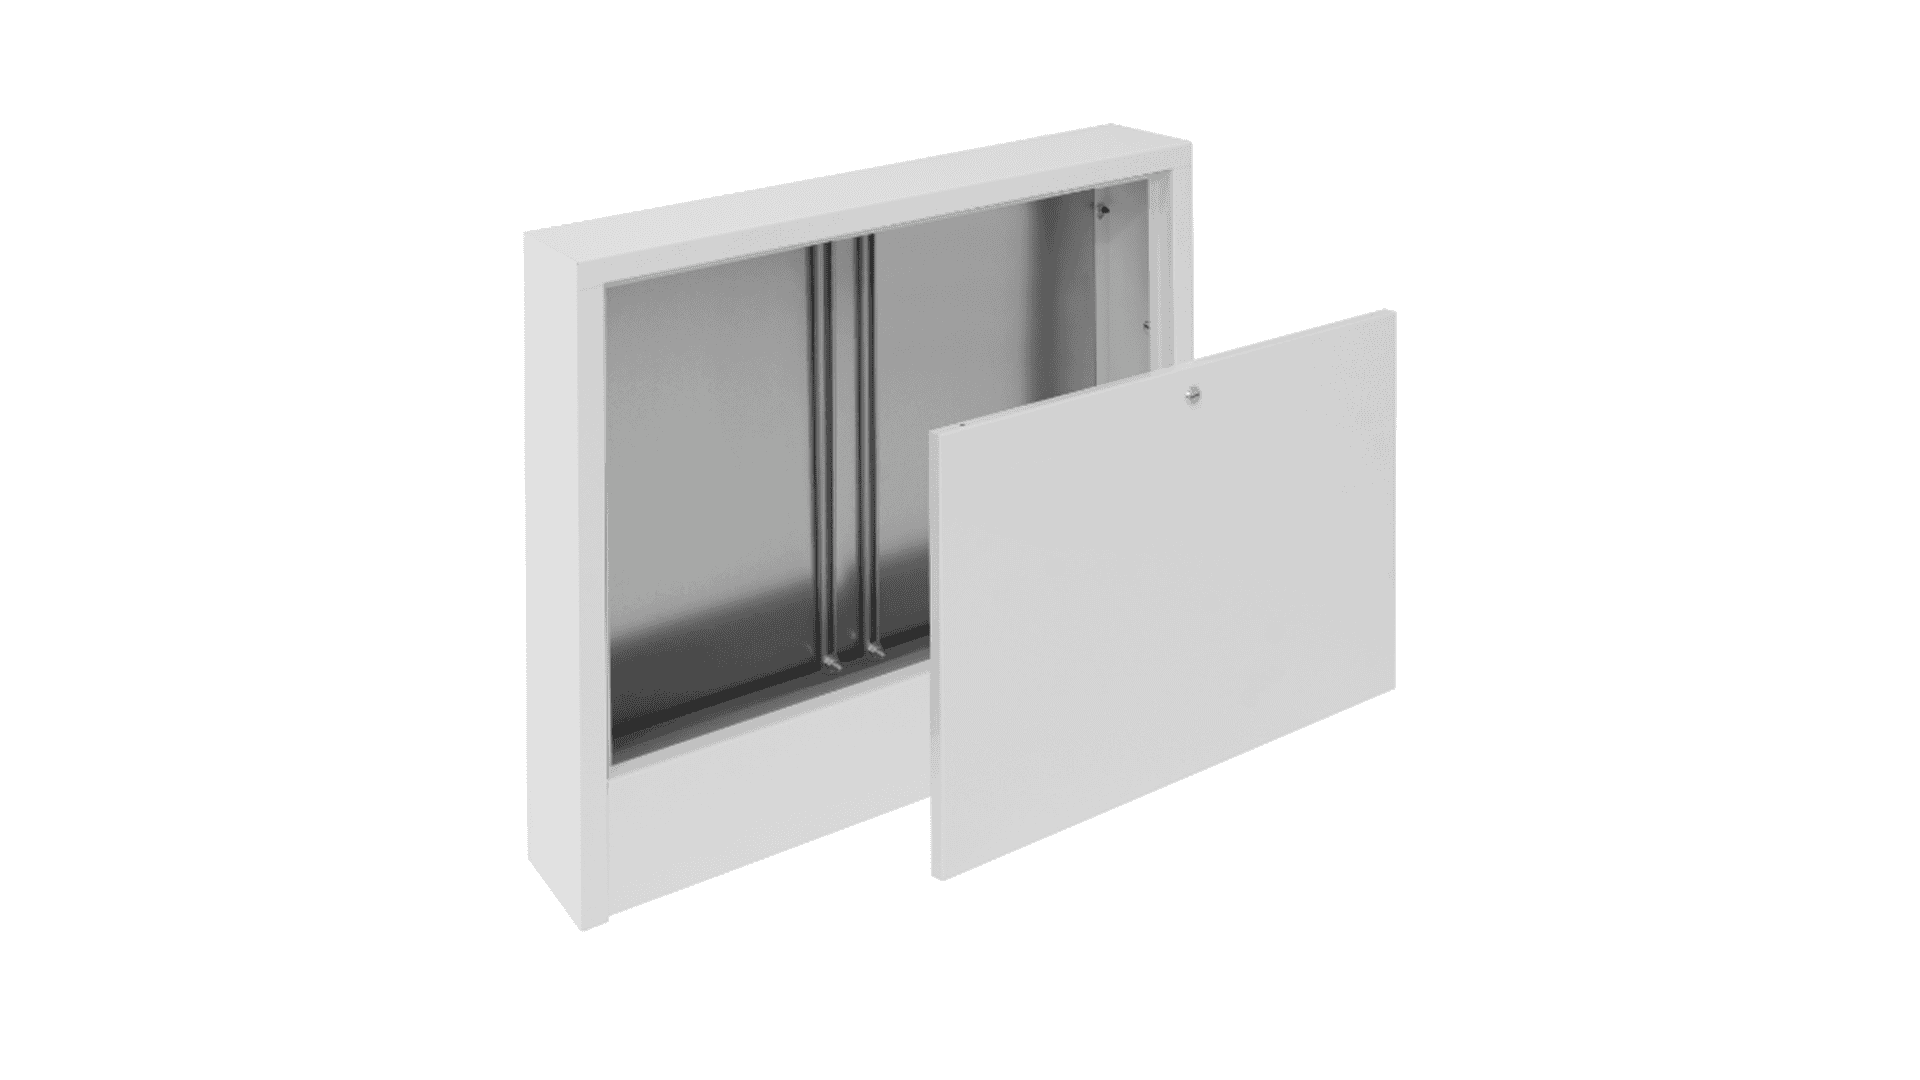 KAN-therm - Slim and Slim+ installation cabinets - SWNE surface-mounted cabinet for radiator and domestic water installations